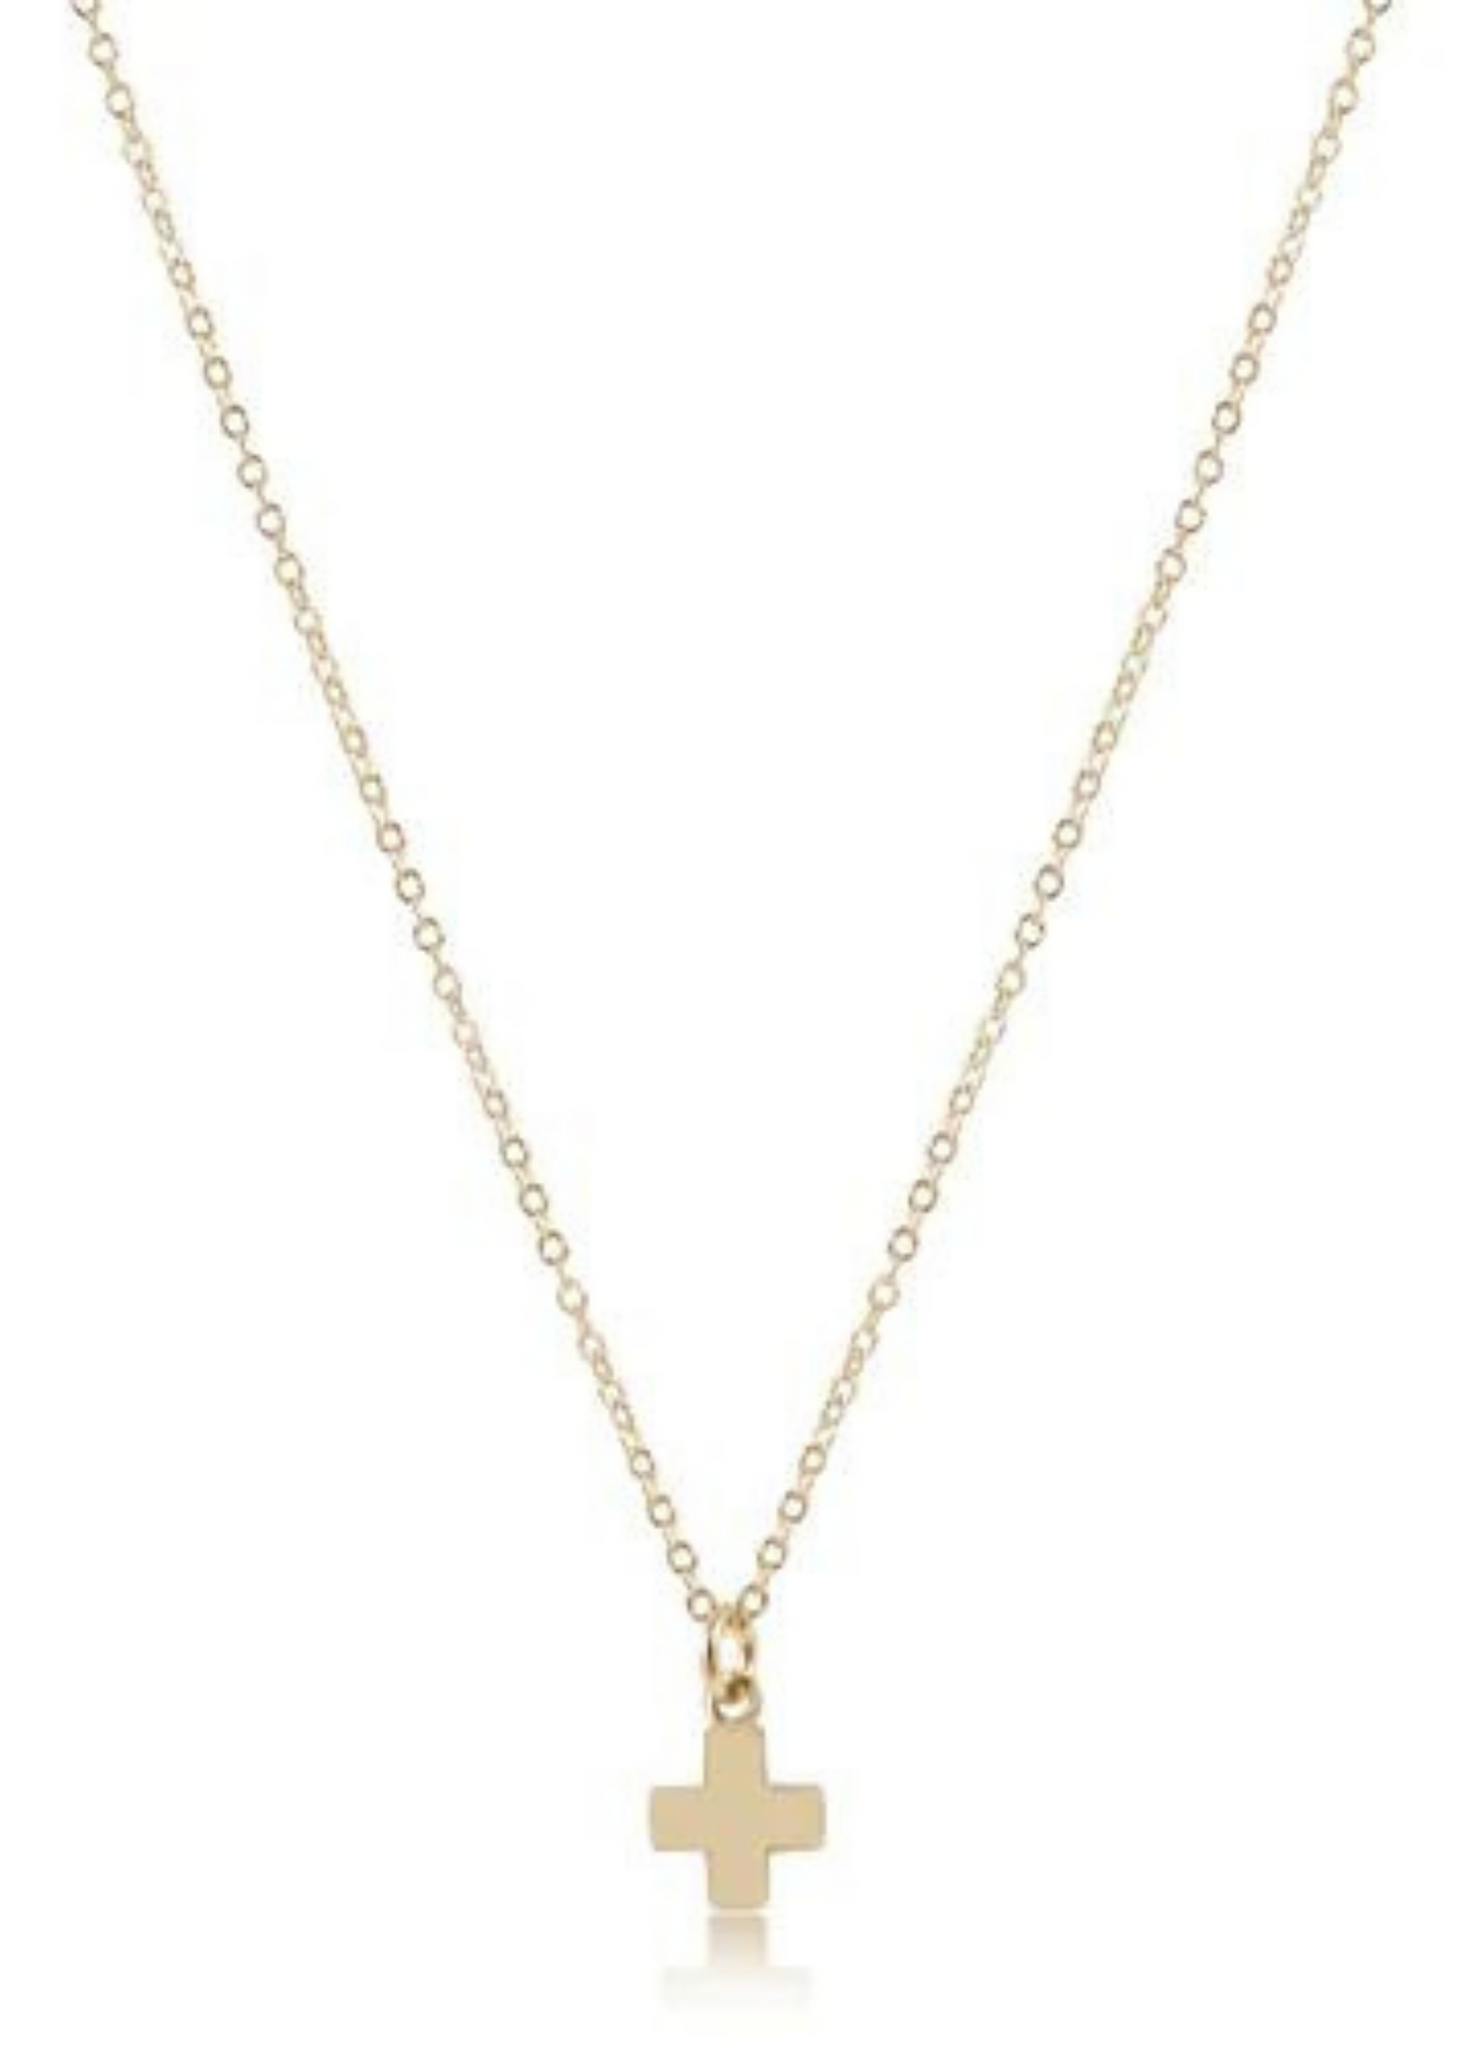 16" Necklace Gold - Signature Cross Small Gold Charm